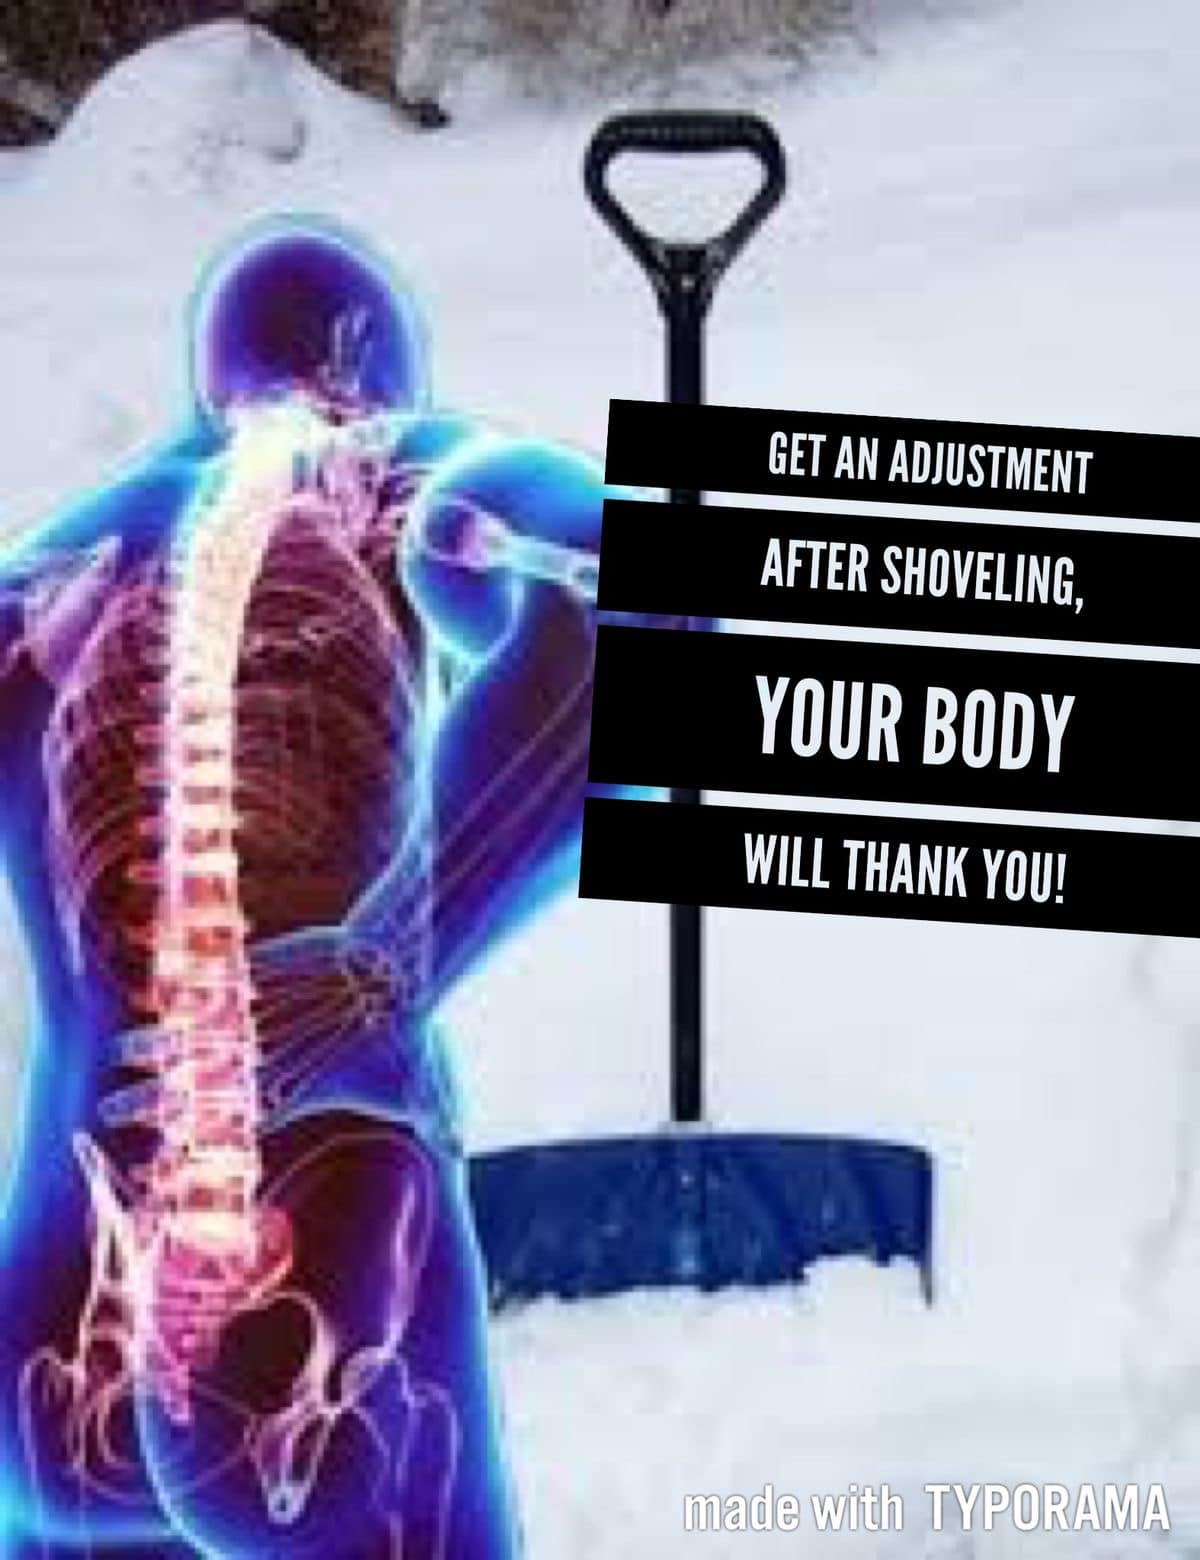 South Central Chiropractic 206 N Saunders Ave, Sutton Nebraska 68979